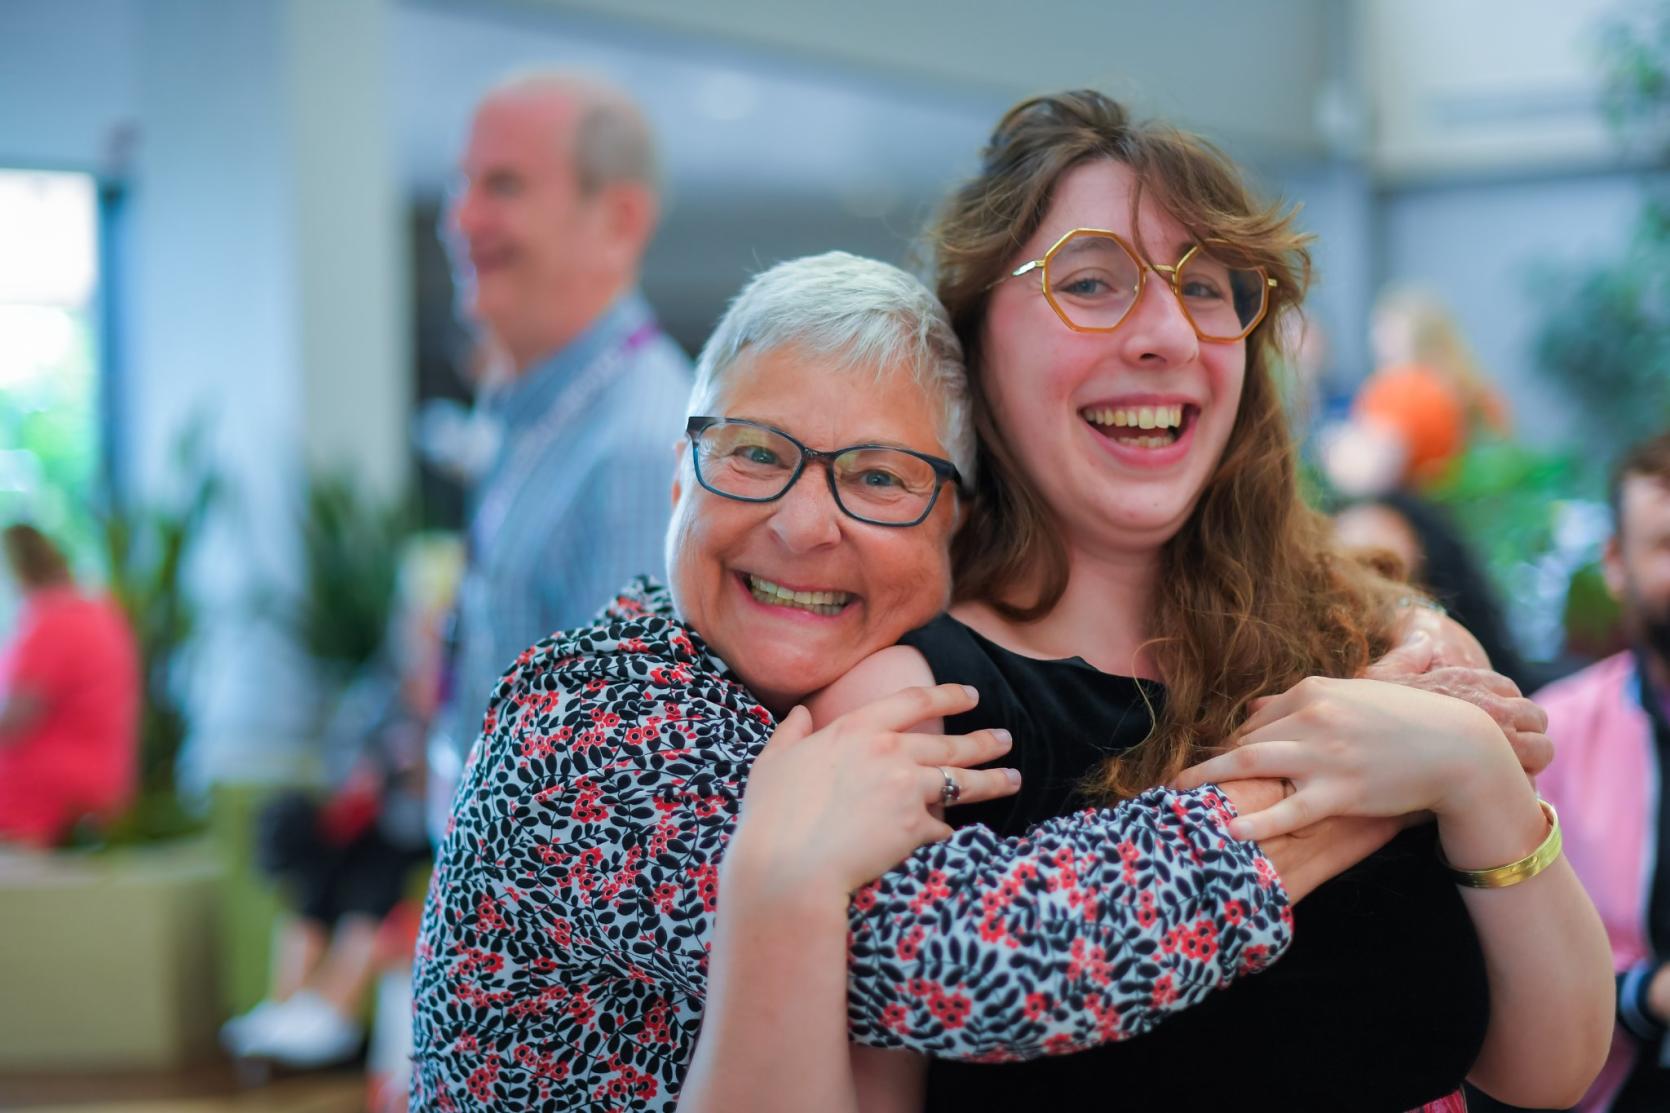 two women embrace and smile at the camera